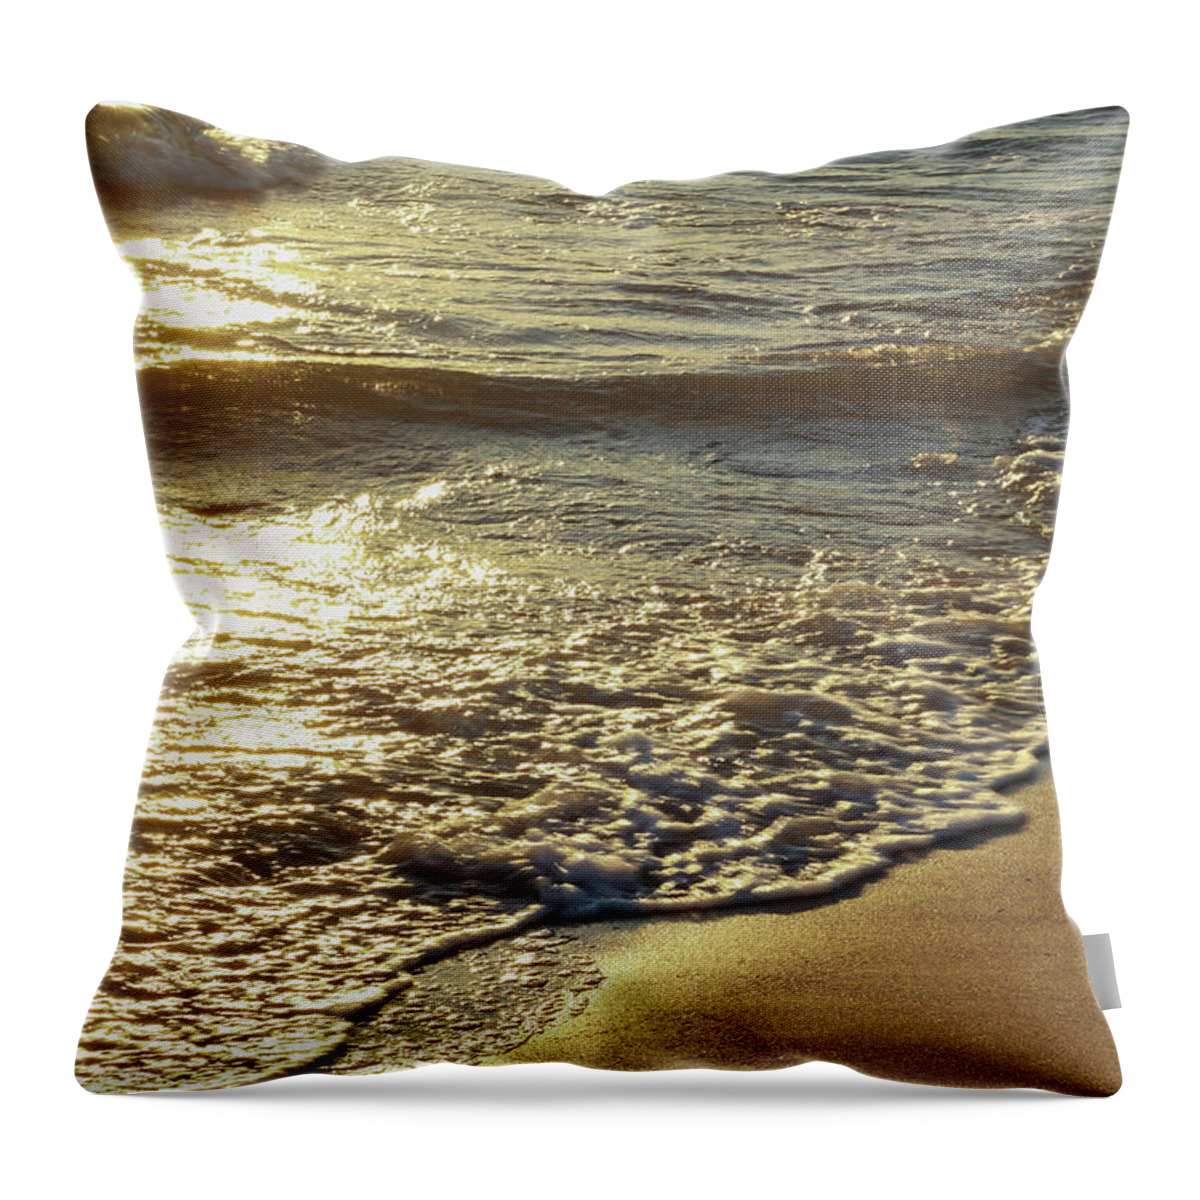 Tranquility Throw Pillow featuring the photograph Sea Shore by Yuko Yamada